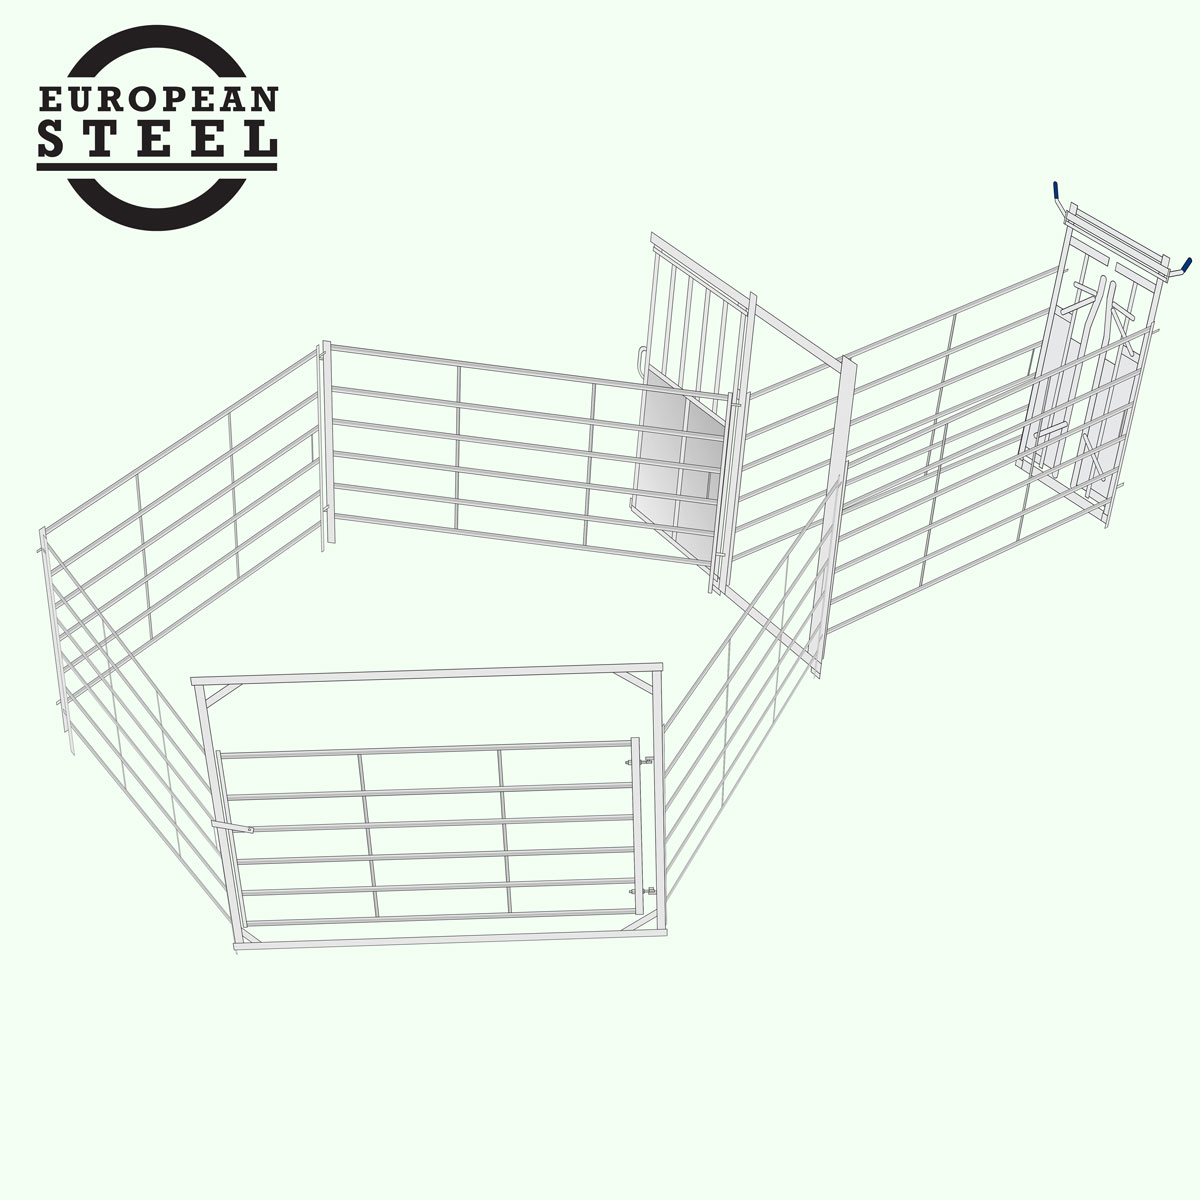 Cattle yards: Easy Handler AUTO up to 10 head